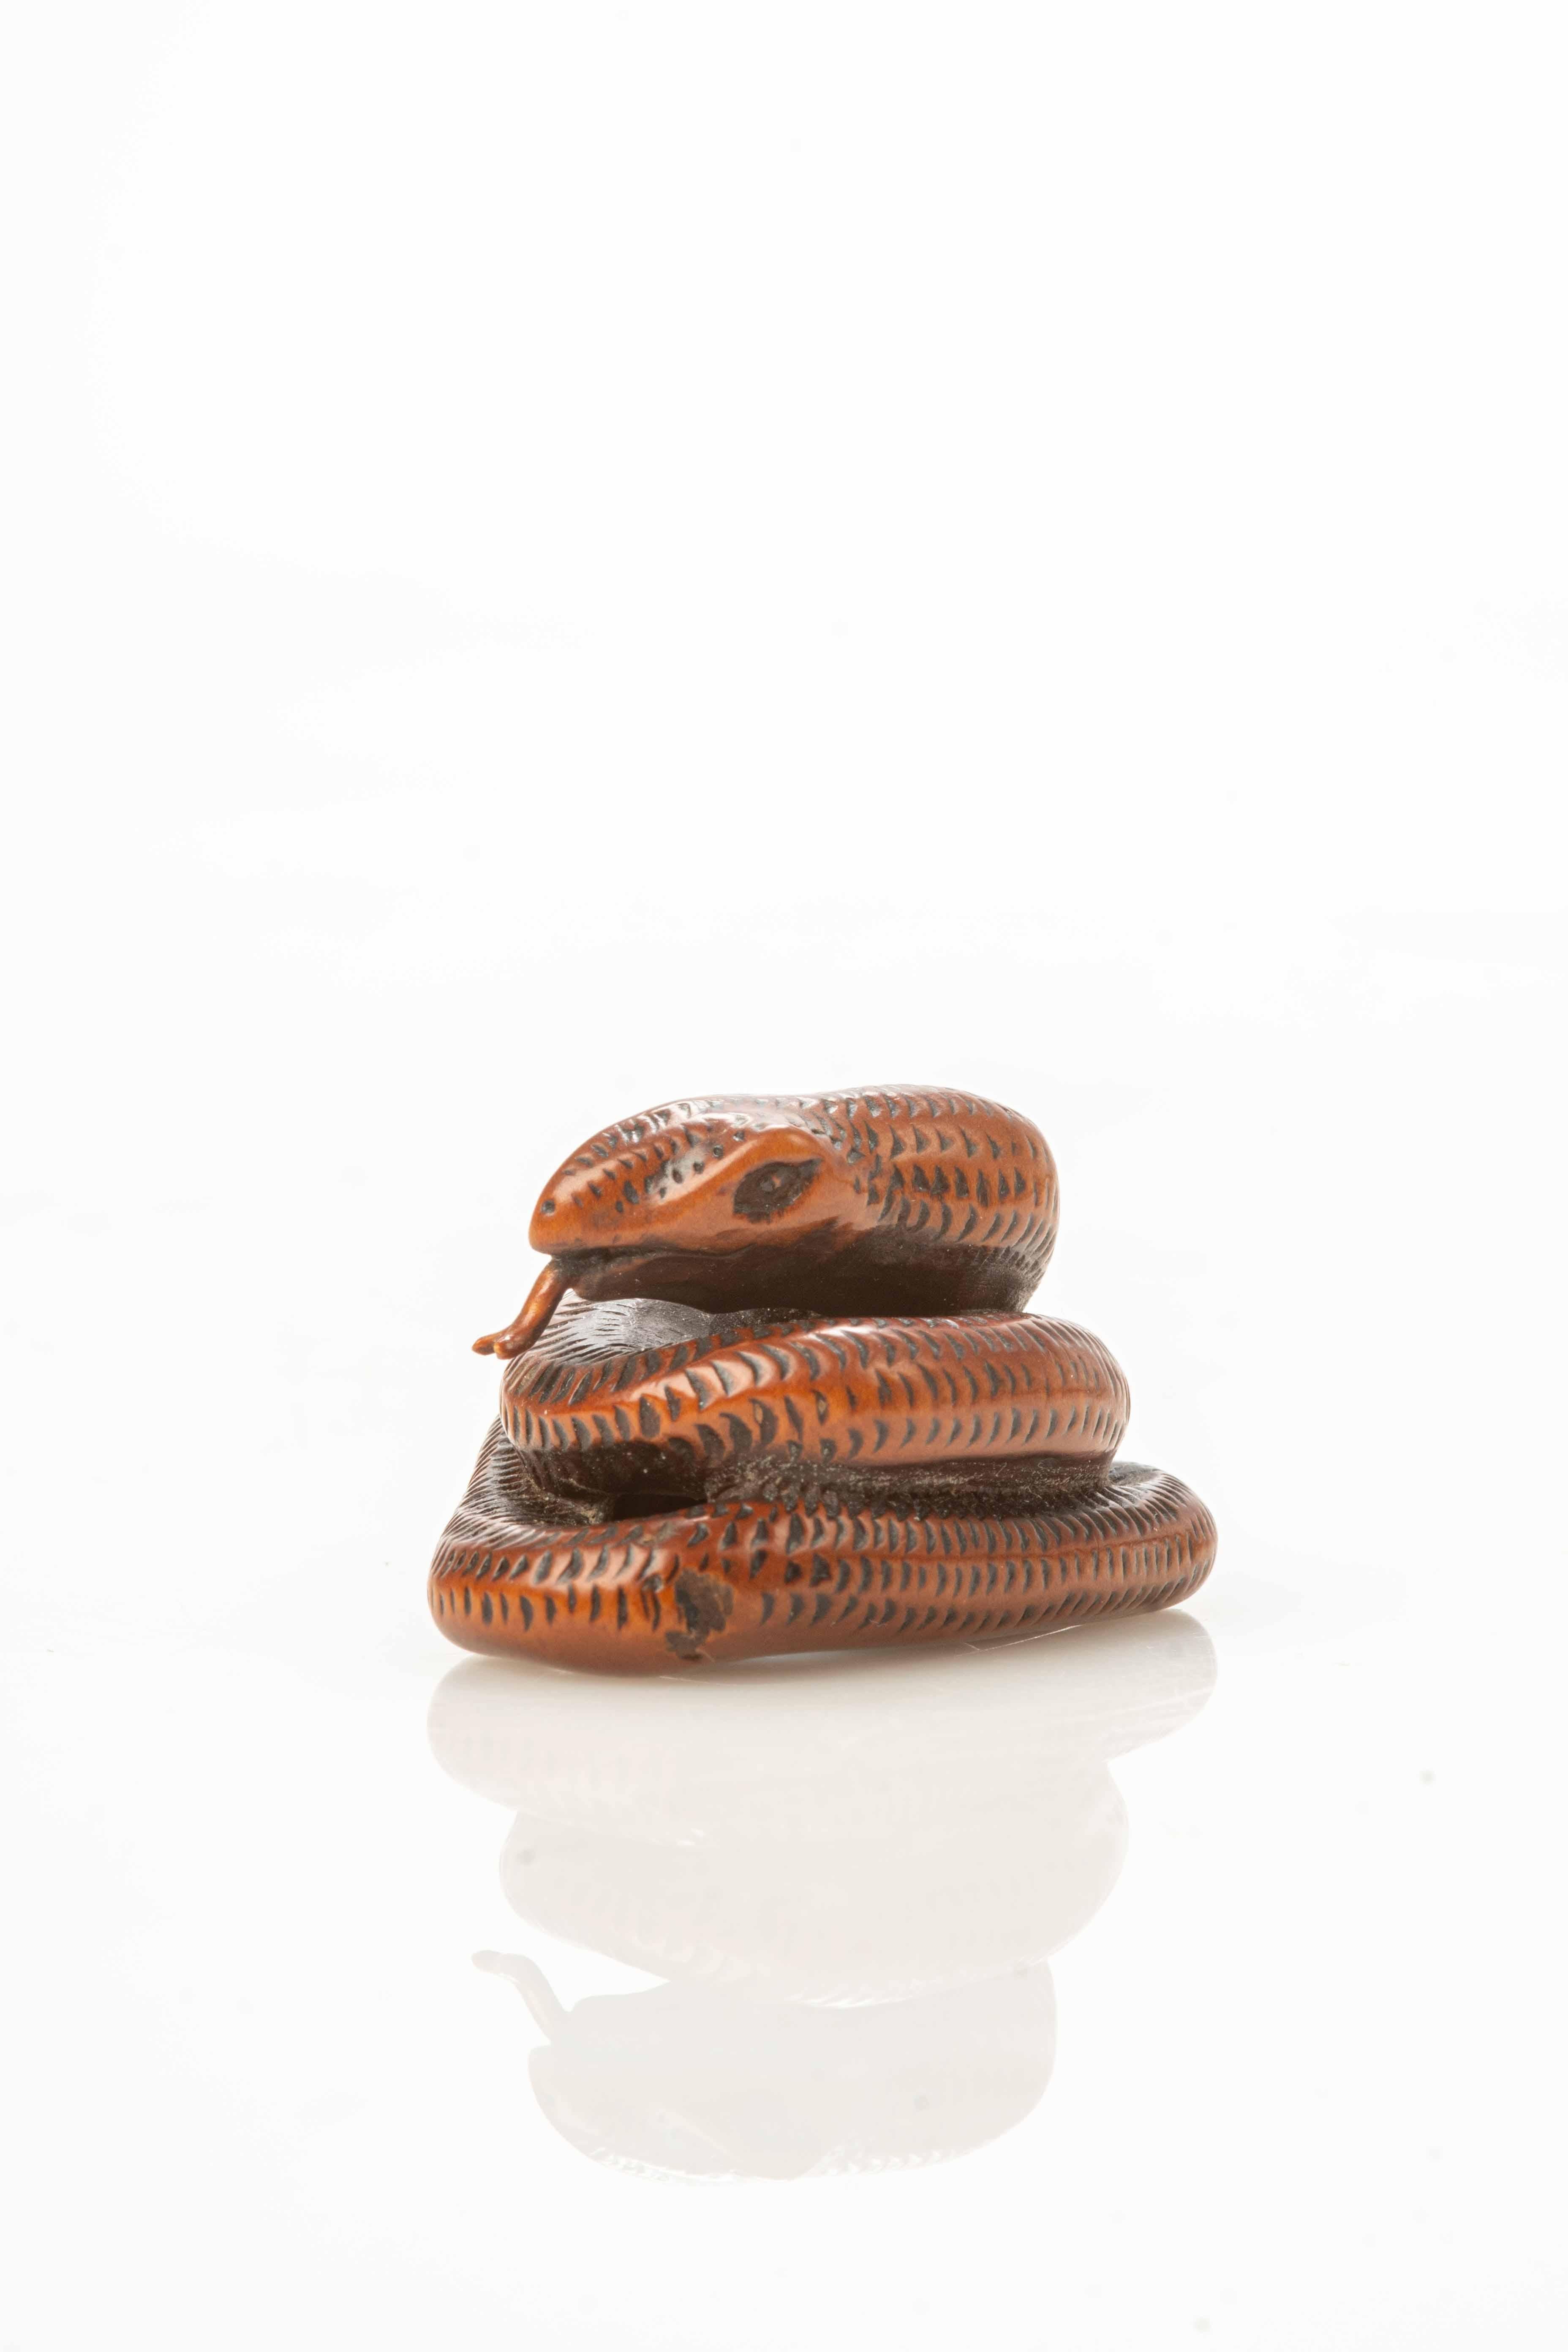 Boxwood netsuke depicting a snake coiled around itself.

Signature engraved under the base.

Origin: Japan

Period: Meiji late 19th century.

Dimensions: 4 x 3.5 x 2 cm.

State of conservation: Very good